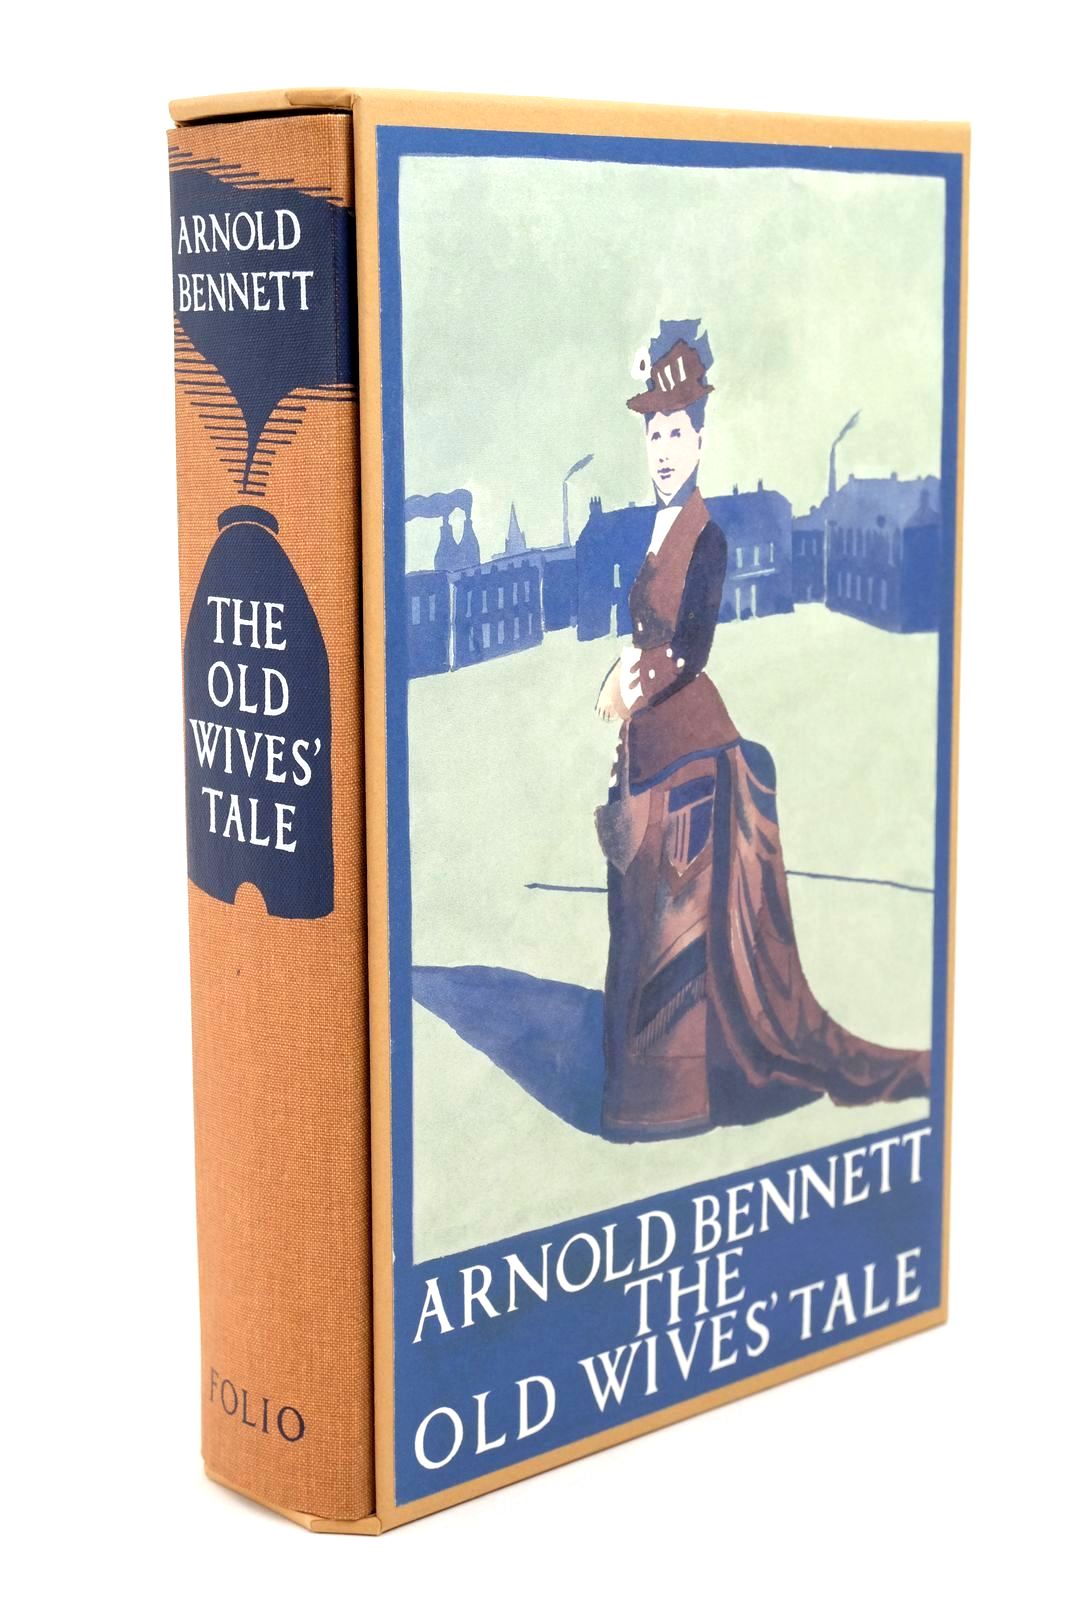 Photo of THE OLD WIVES' TALE written by Bennett, Arnold illustrated by Harte, Glynn Boyd published by Folio Society (STOCK CODE: 1323122)  for sale by Stella & Rose's Books